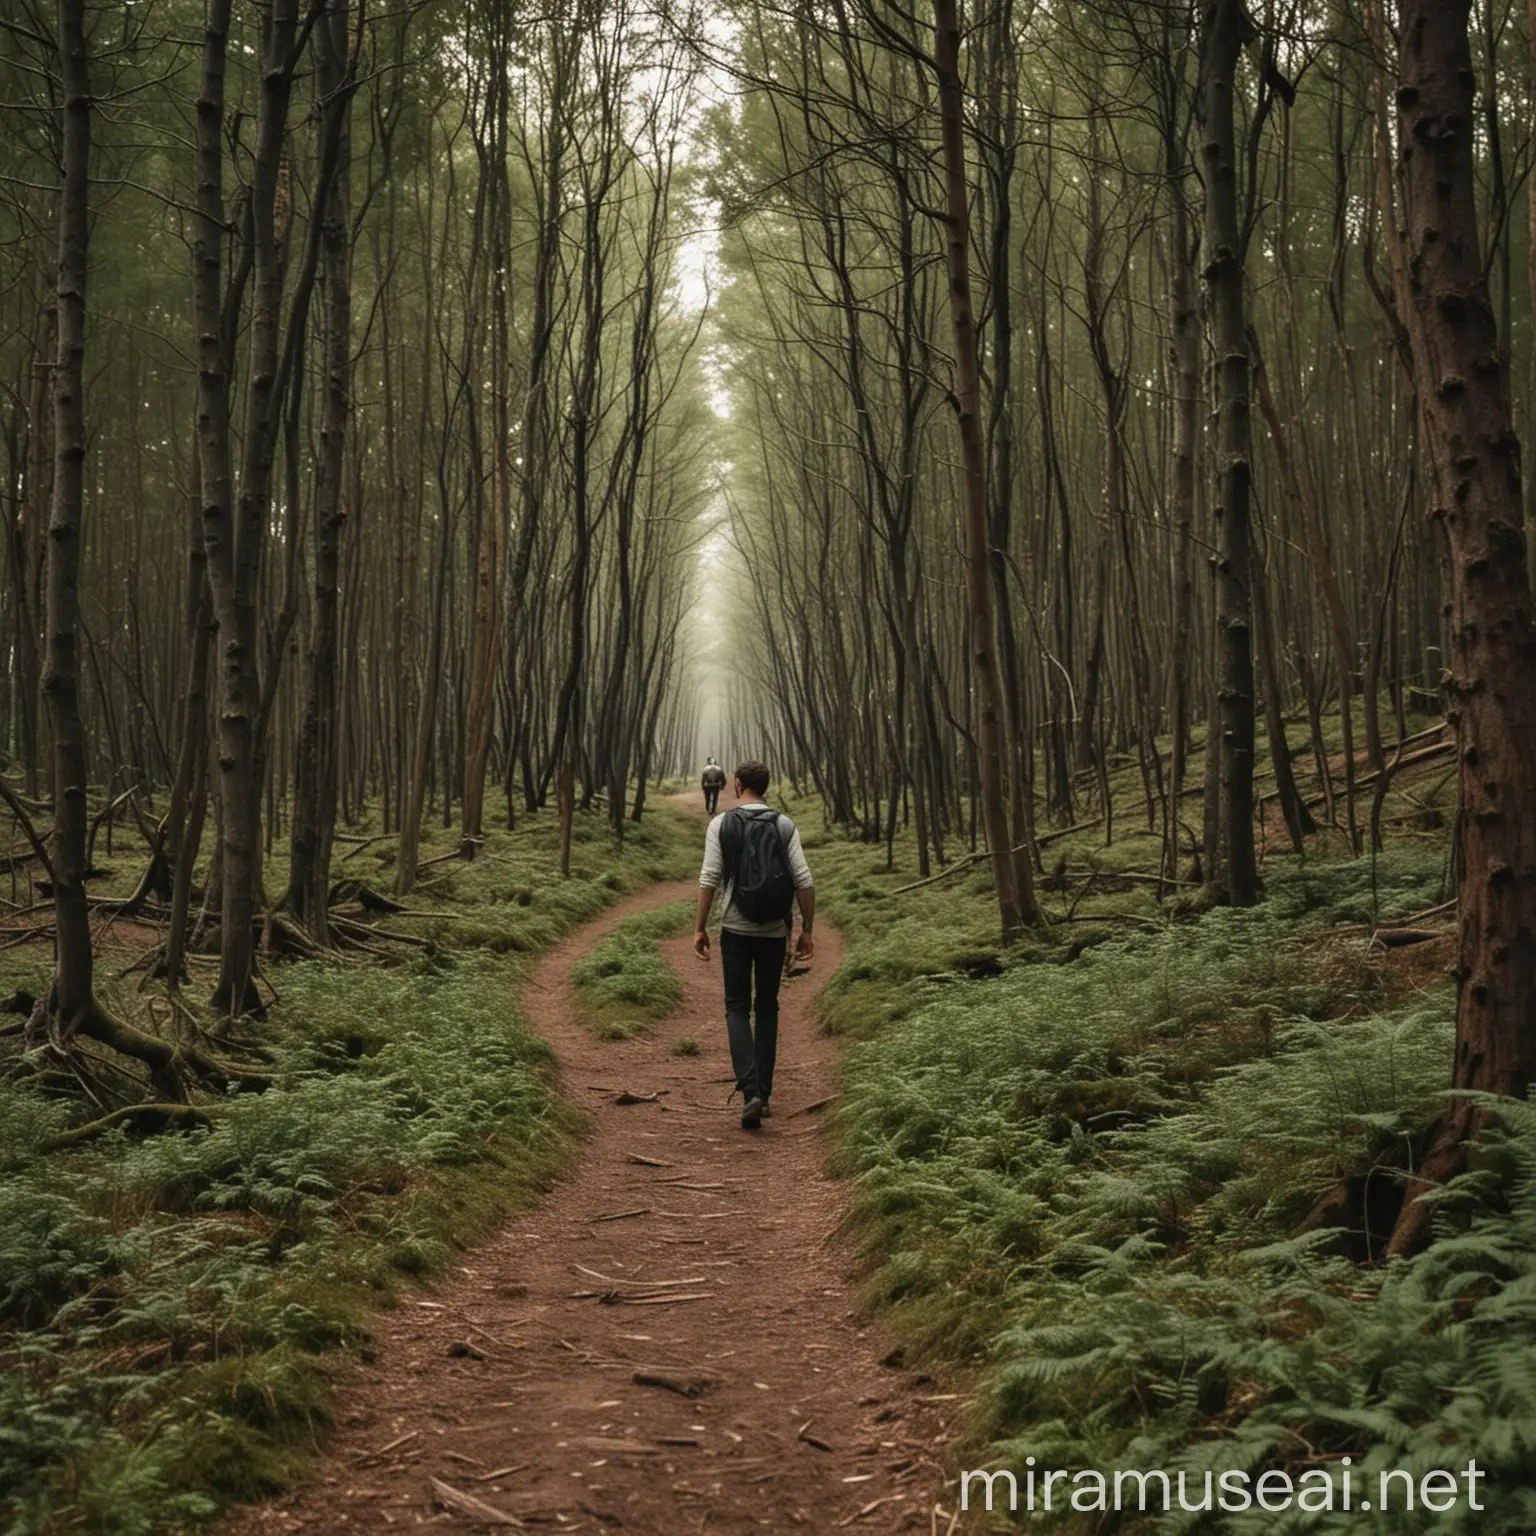 Man walking through the forest